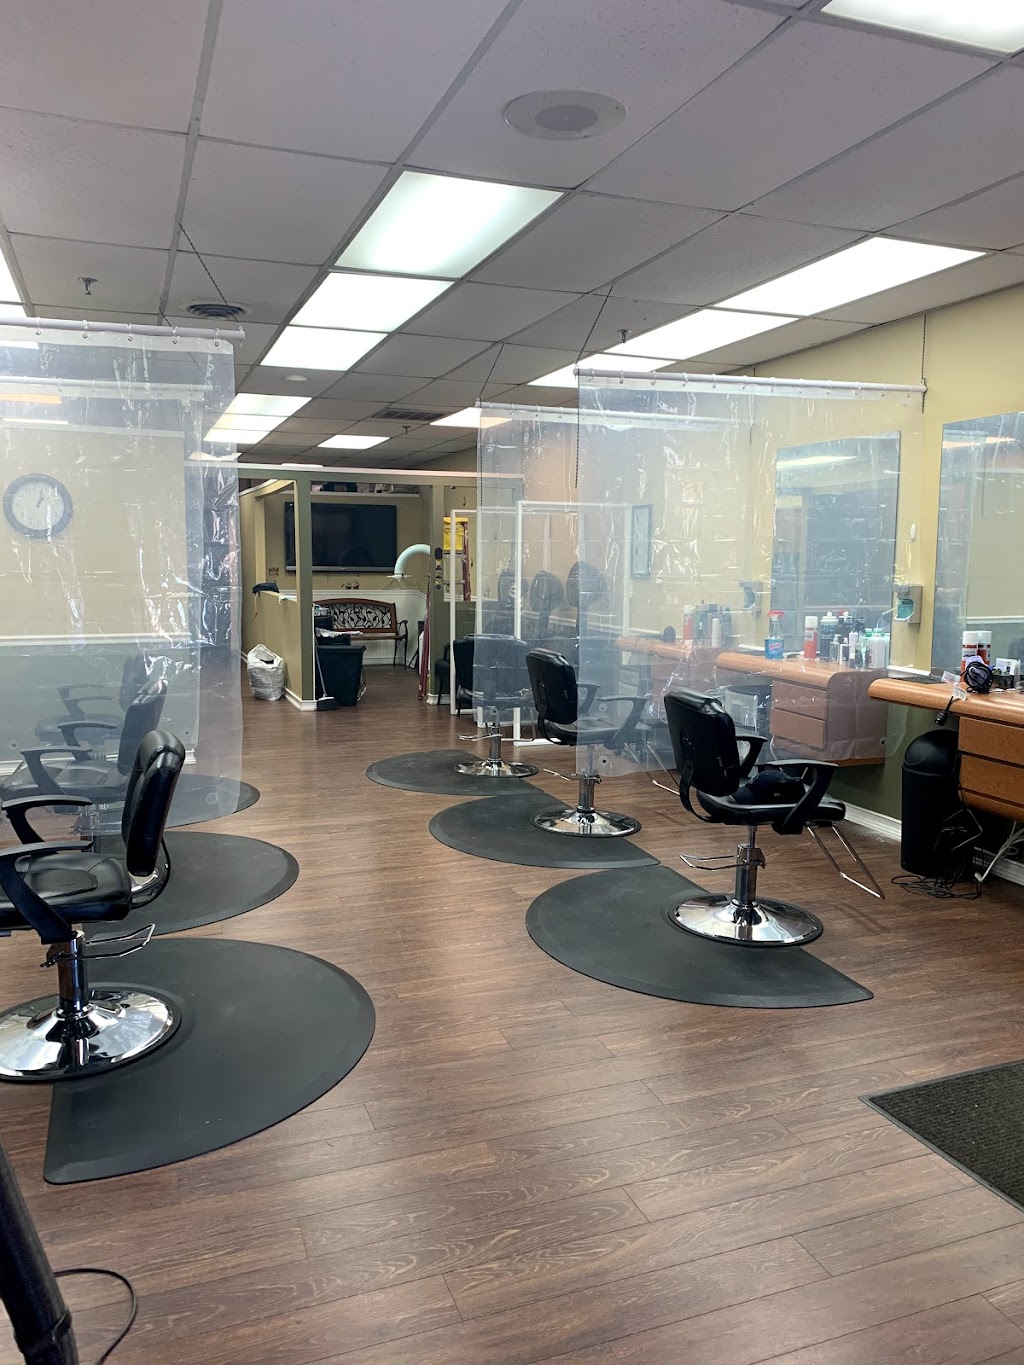 Little People Family Haircutters | 1699 NY-112, Medford, NY 11763 | Phone: (631) 289-4313